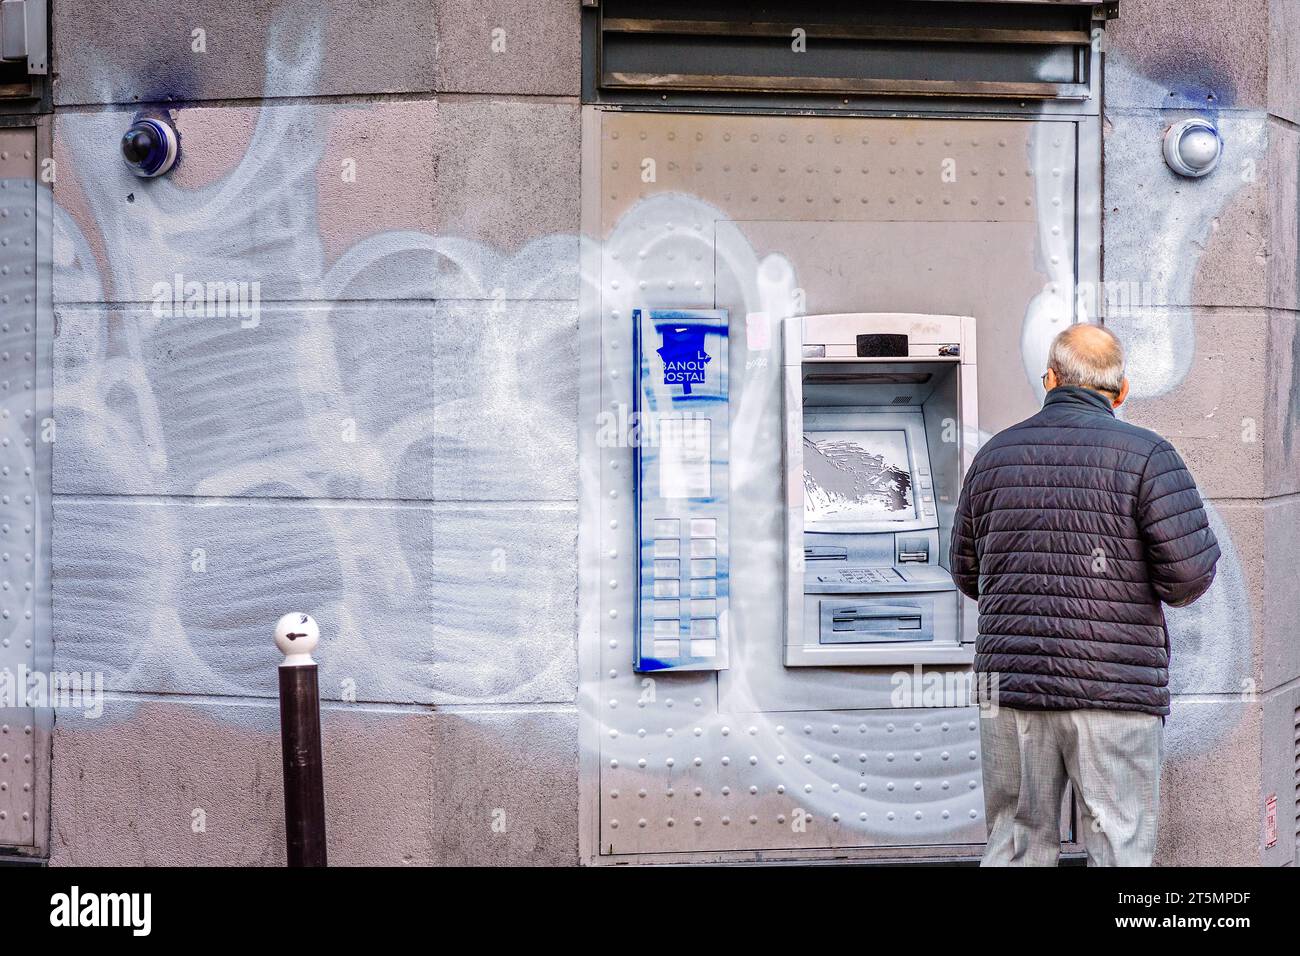 La Poste (French post office) cash distributor vandalised with white spray paint - Belleville, Paris 20, France. Stock Photo